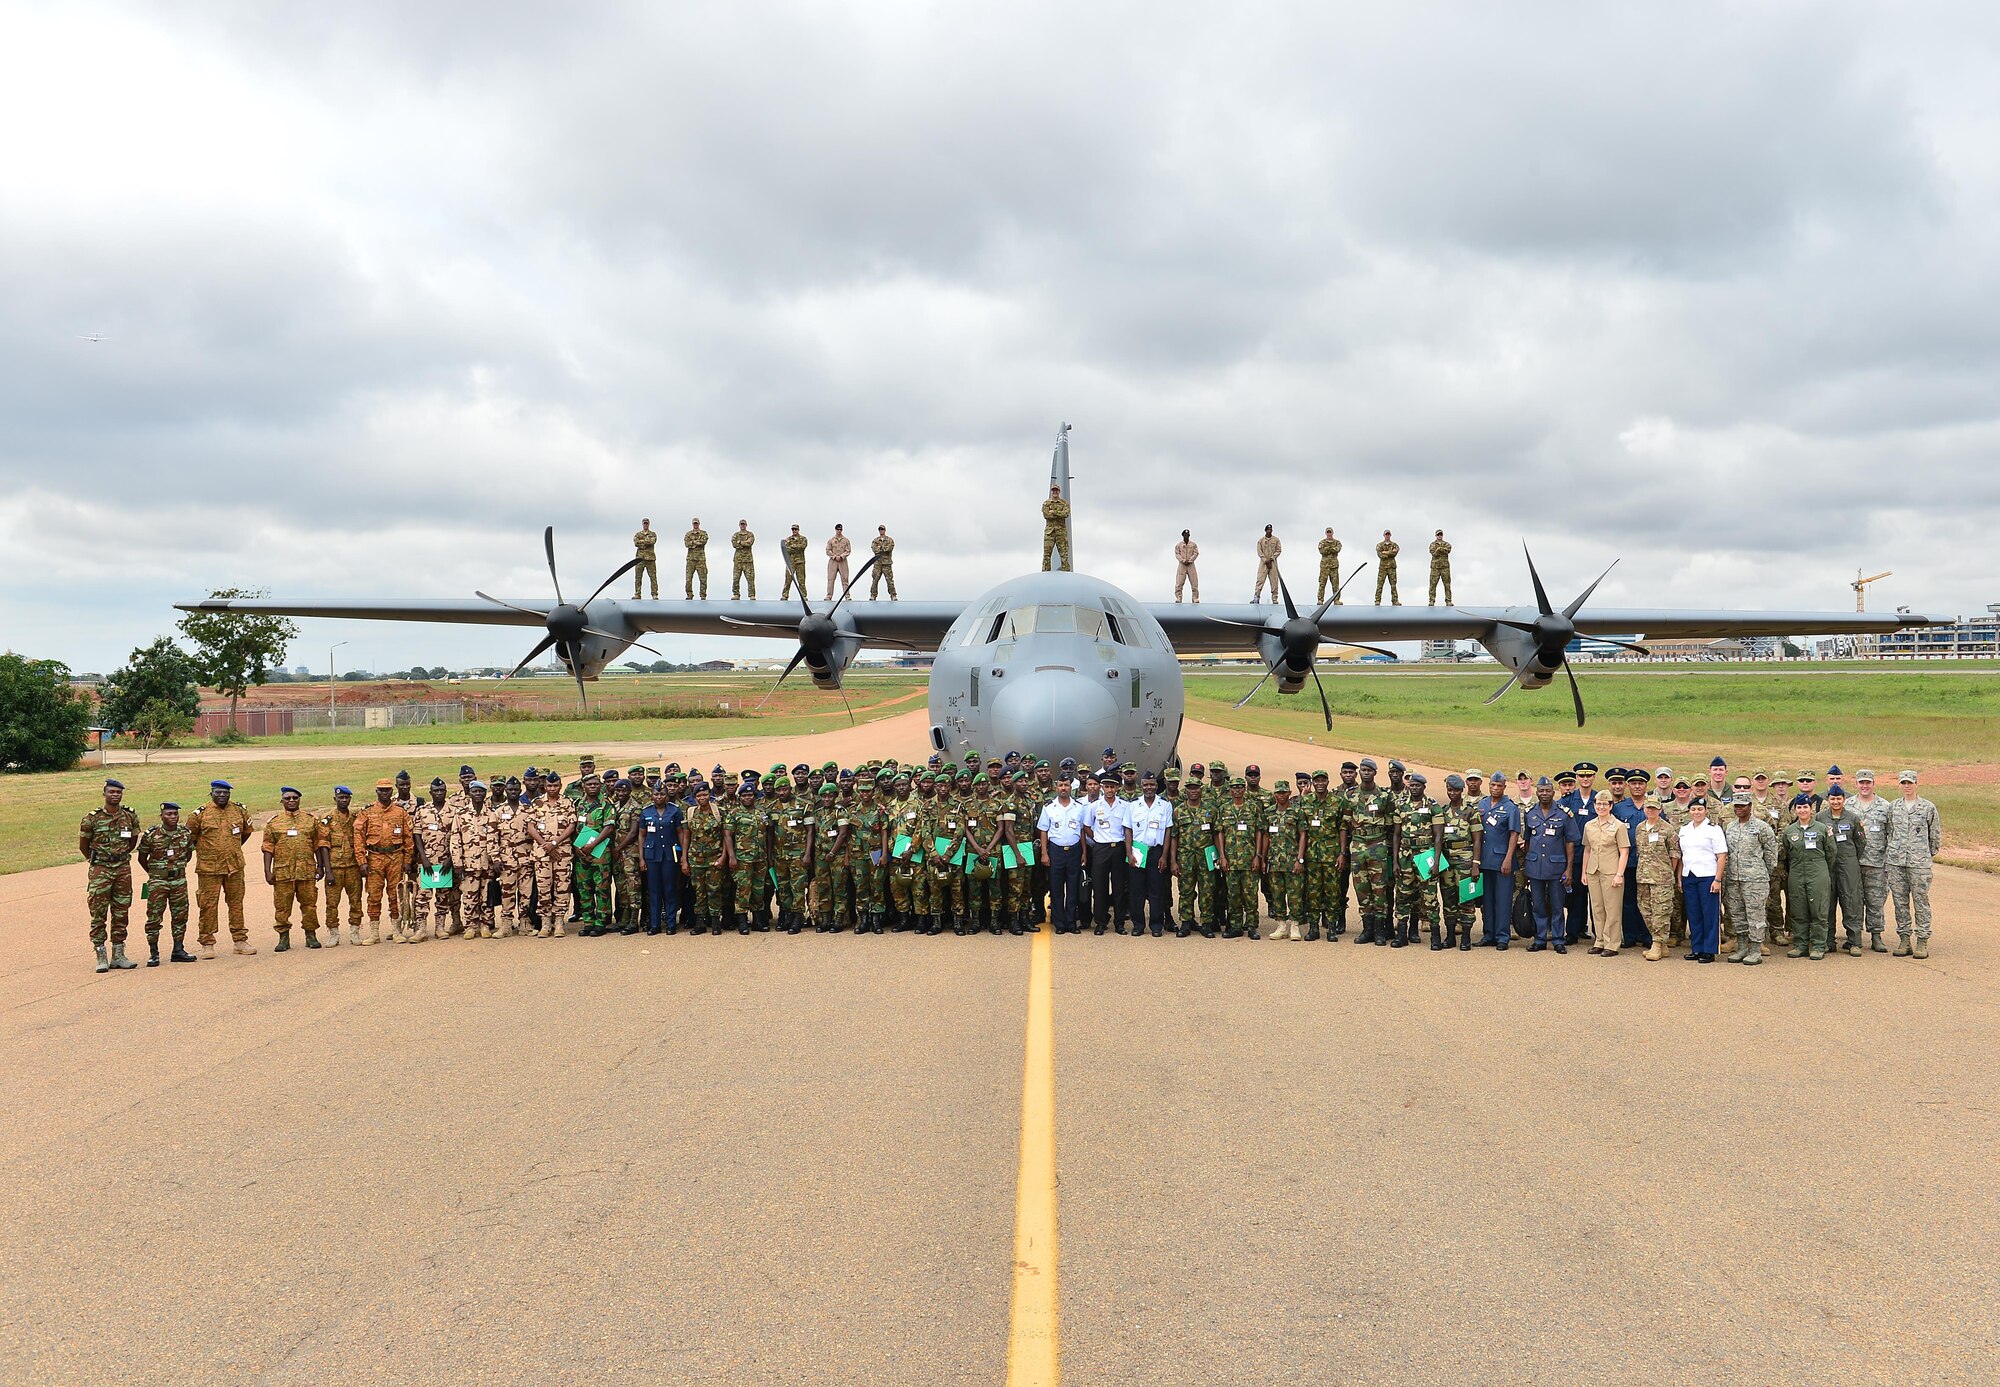 African Partnership Flight participants pose in front of an C-130J Super Hercules for a group photo Sept. 12, 2016. Twelve West African counties are participating in APF Ghana, the focus of this APF is expeditionary air base buildup. (U.S. Air Force photo by Staff Sgt. Stephanie Longoria)